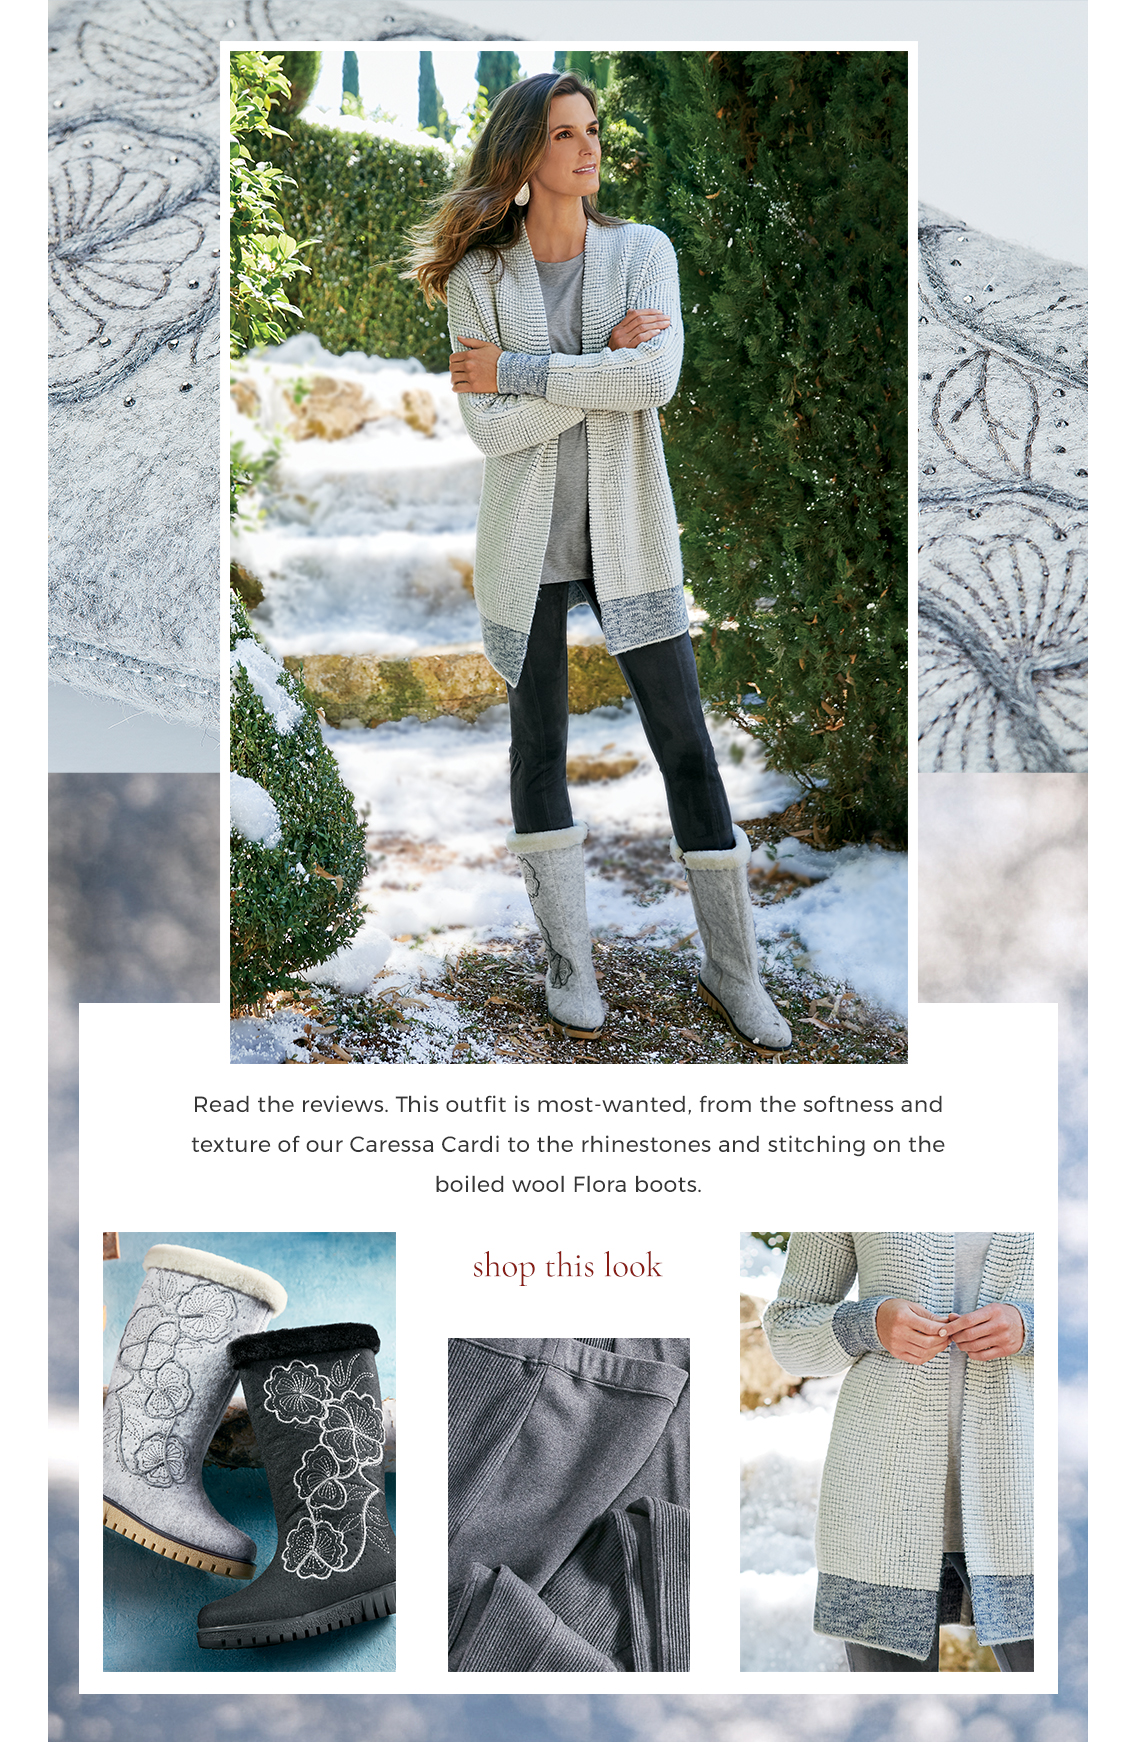 Read the reviews. This outfit is most-wanted, from the softness and texture of our Caressa Cardi to the rhinestones and stitching on the boiled wool Flora boots. Shop This Look